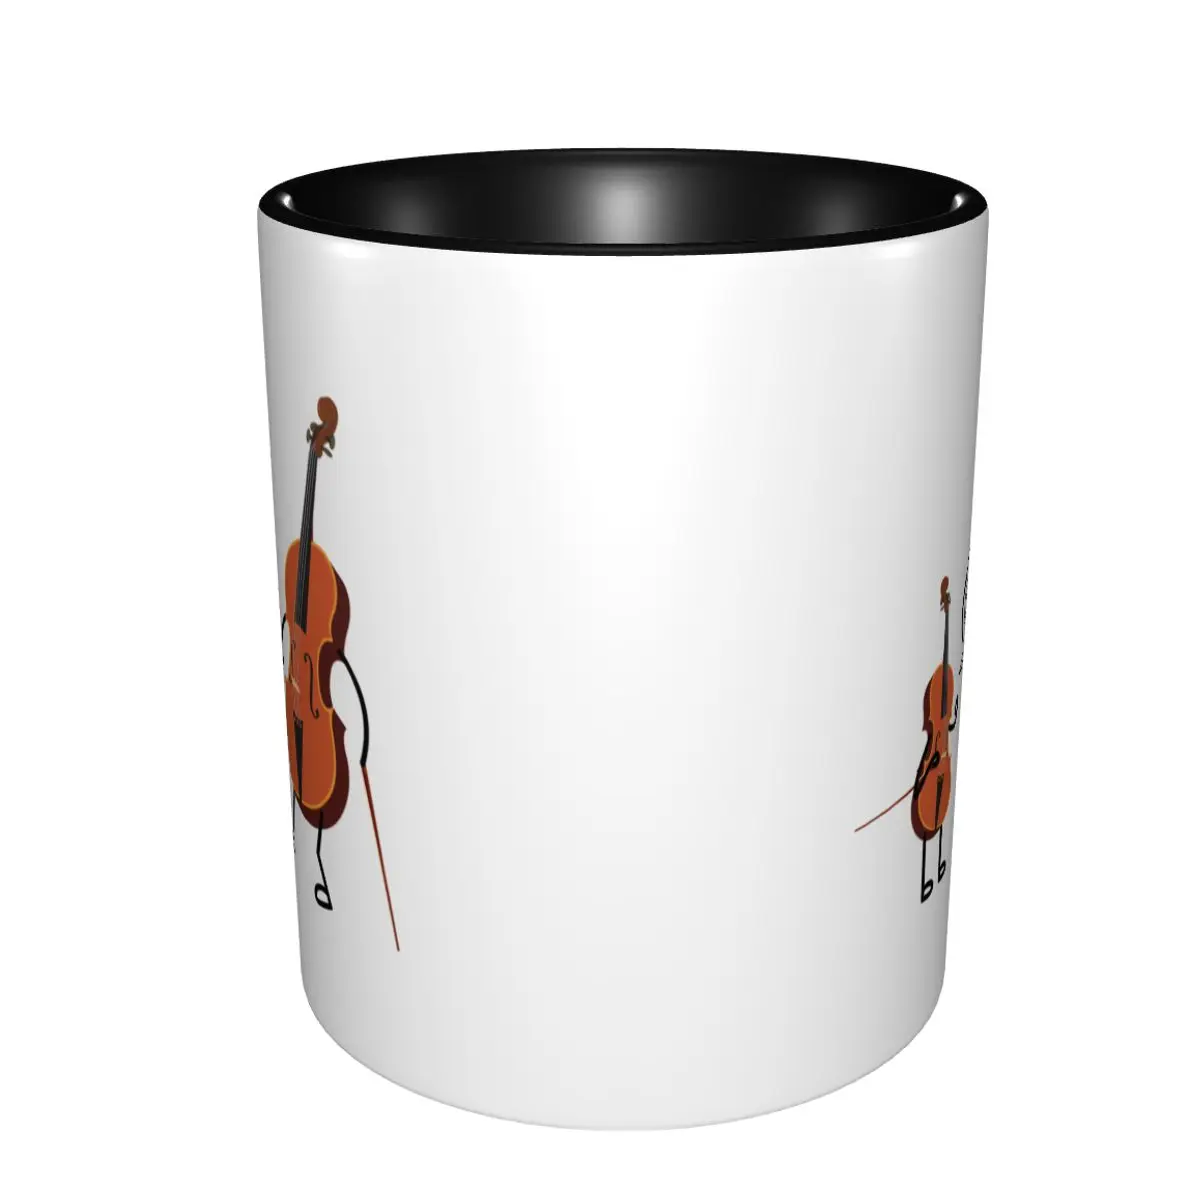 Cello is my super power (white) Coffee Mug by a musician on the roof